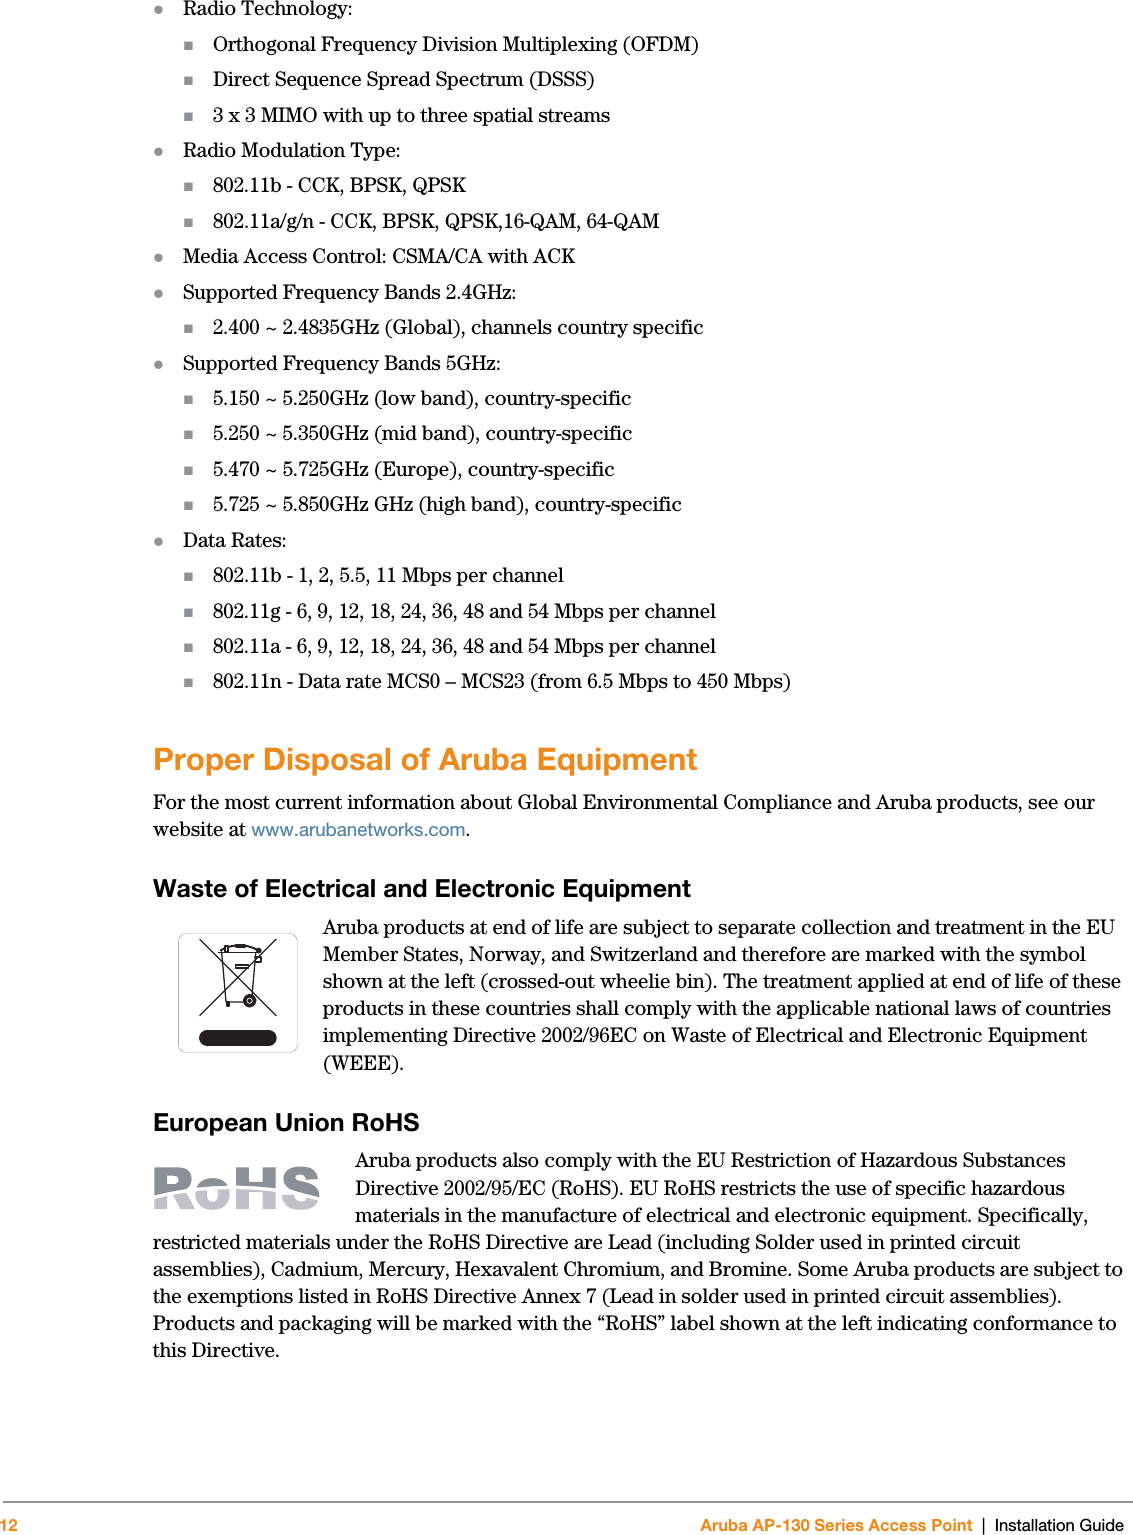 12 Aruba AP-130 Series Access Point | Installation GuideRadio Technology:Orthogonal Frequency Division Multiplexing (OFDM)Direct Sequence Spread Spectrum (DSSS)3 x 3 MIMO with up to three spatial streams Radio Modulation Type:802.11b - CCK, BPSK, QPSK802.11a/g/n - CCK, BPSK, QPSK,16-QAM, 64-QAMMedia Access Control: CSMA/CA with ACKSupported Frequency Bands 2.4GHz:2.400 ~ 2.4835GHz (Global), channels country specificSupported Frequency Bands 5GHz:5.150 ~ 5.250GHz (low band), country-specific5.250 ~ 5.350GHz (mid band), country-specific5.470 ~ 5.725GHz (Europe), country-specific5.725 ~ 5.850GHz GHz (high band), country-specificData Rates:802.11b - 1, 2, 5.5, 11 Mbps per channel802.11g - 6, 9, 12, 18, 24, 36, 48 and 54 Mbps per channel802.11a - 6, 9, 12, 18, 24, 36, 48 and 54 Mbps per channel802.11n - Data rate MCS0 – MCS23 (from 6.5 Mbps to 450 Mbps)Proper Disposal of Aruba EquipmentFor the most current information about Global Environmental Compliance and Aruba products, see our website at www.arubanetworks.com.Waste of Electrical and Electronic EquipmentAruba products at end of life are subject to separate collection and treatment in the EU Member States, Norway, and Switzerland and therefore are marked with the symbol shown at the left (crossed-out wheelie bin). The treatment applied at end of life of these products in these countries shall comply with the applicable national laws of countries implementing Directive 2002/96EC on Waste of Electrical and Electronic Equipment (WEEE).European Union RoHSAruba products also comply with the EU Restriction of Hazardous Substances Directive 2002/95/EC (RoHS). EU RoHS restricts the use of specific hazardous materials in the manufacture of electrical and electronic equipment. Specifically, restricted materials under the RoHS Directive are Lead (including Solder used in printed circuit assemblies), Cadmium, Mercury, Hexavalent Chromium, and Bromine. Some Aruba products are subject to the exemptions listed in RoHS Directive Annex 7 (Lead in solder used in printed circuit assemblies). Products and packaging will be marked with the “RoHS” label shown at the left indicating conformance to this Directive.